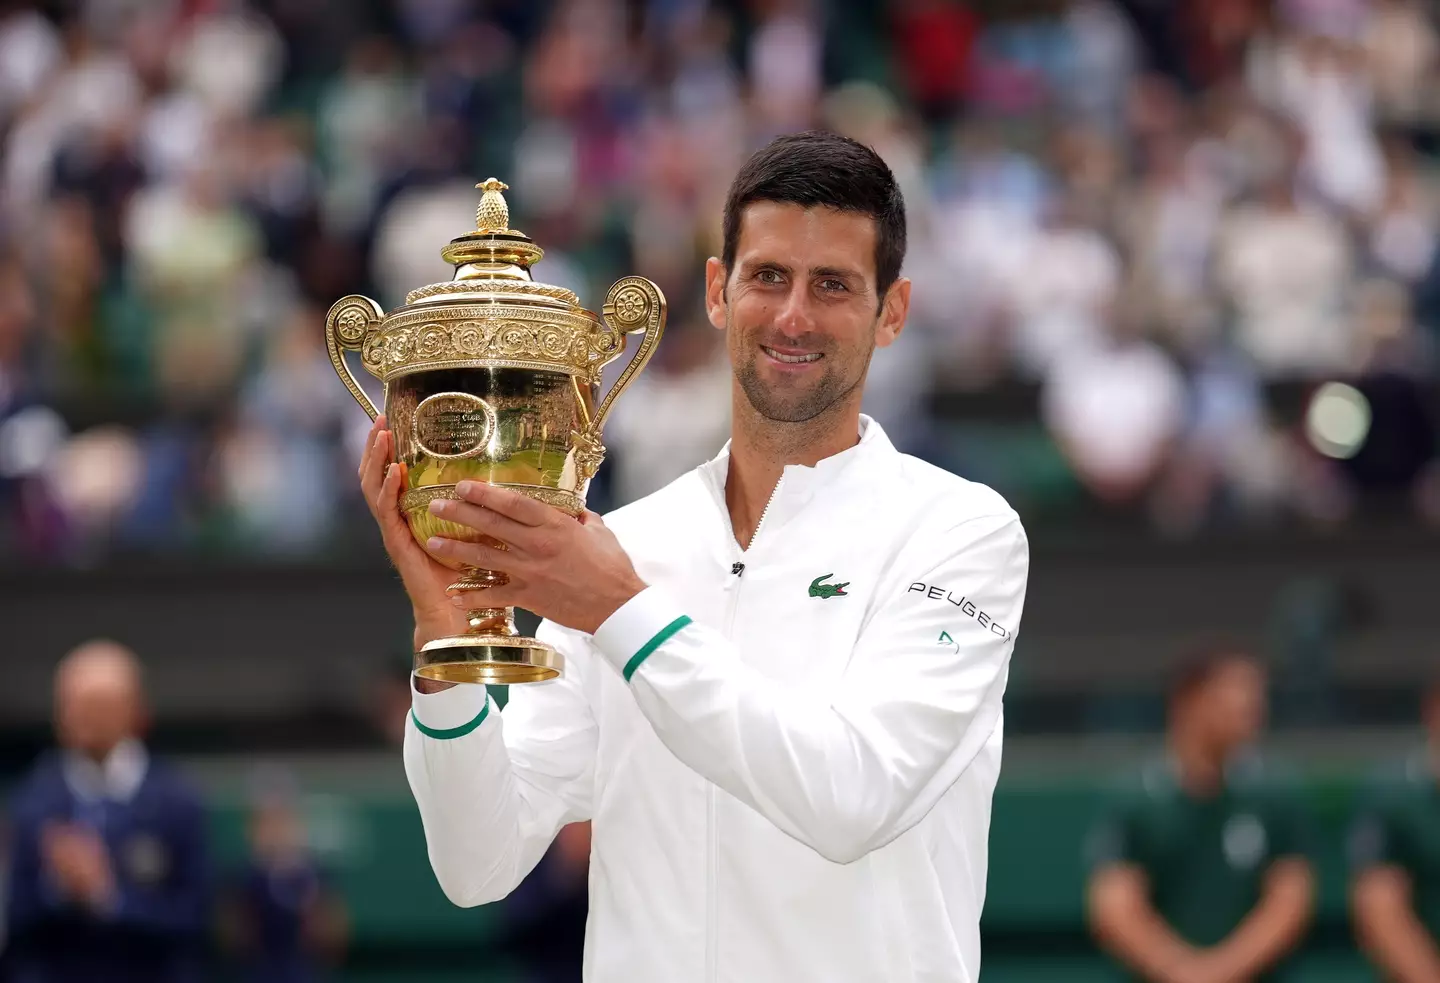 Current Wimbledon champion Djokovic is one of the players to have hit out at the tournament's decision. Image: PA Images